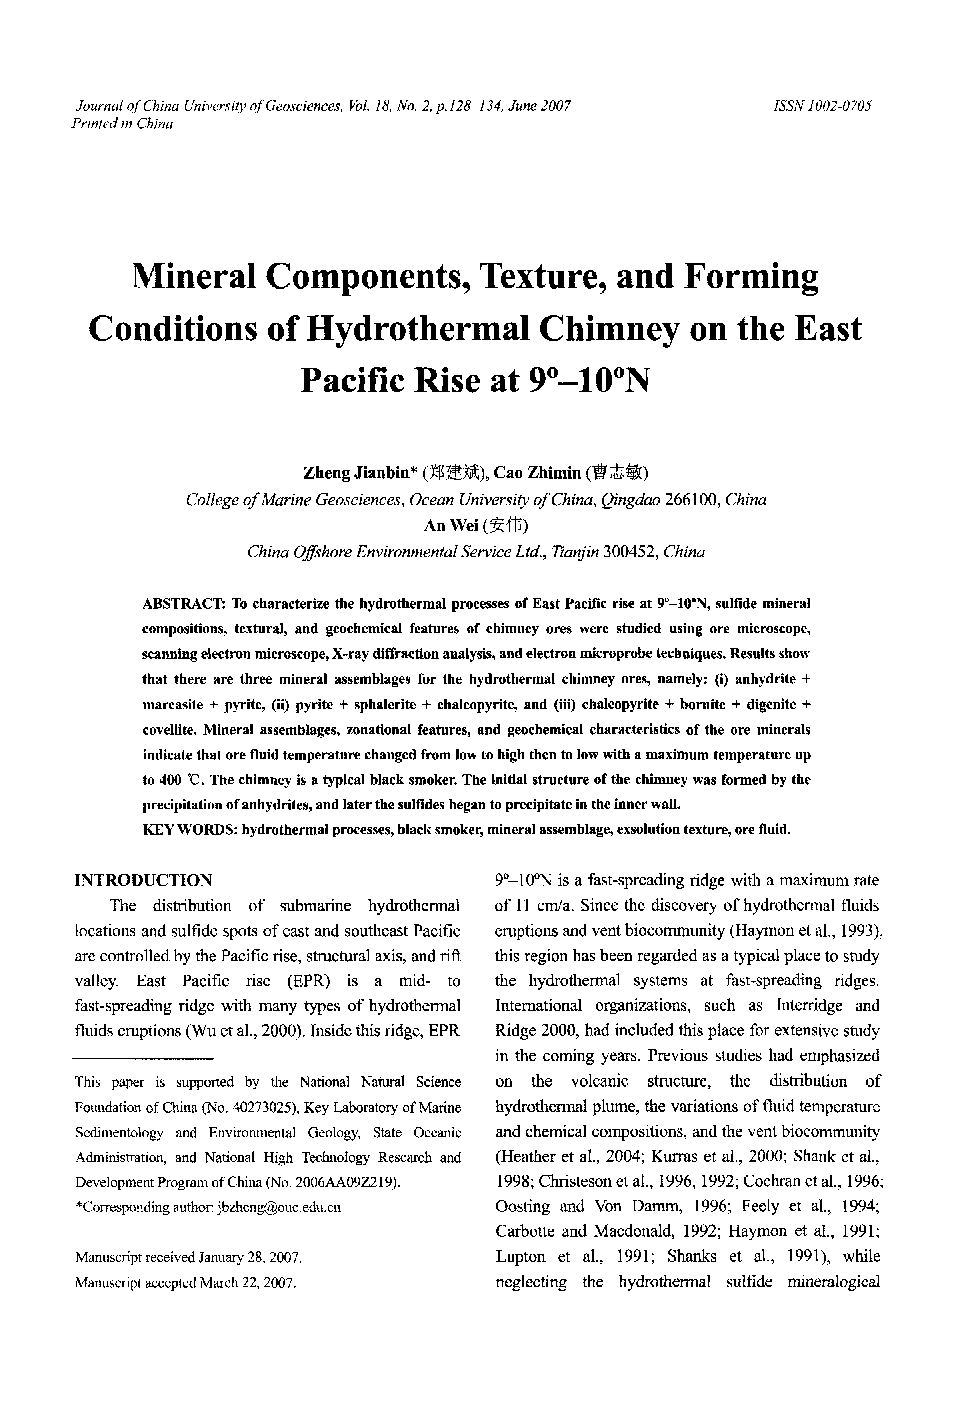 Mineral Components, Texture, and Forming Conditions of Hydrothermal Chimney on the East Pacific Rise at 9Â°-10Â°N